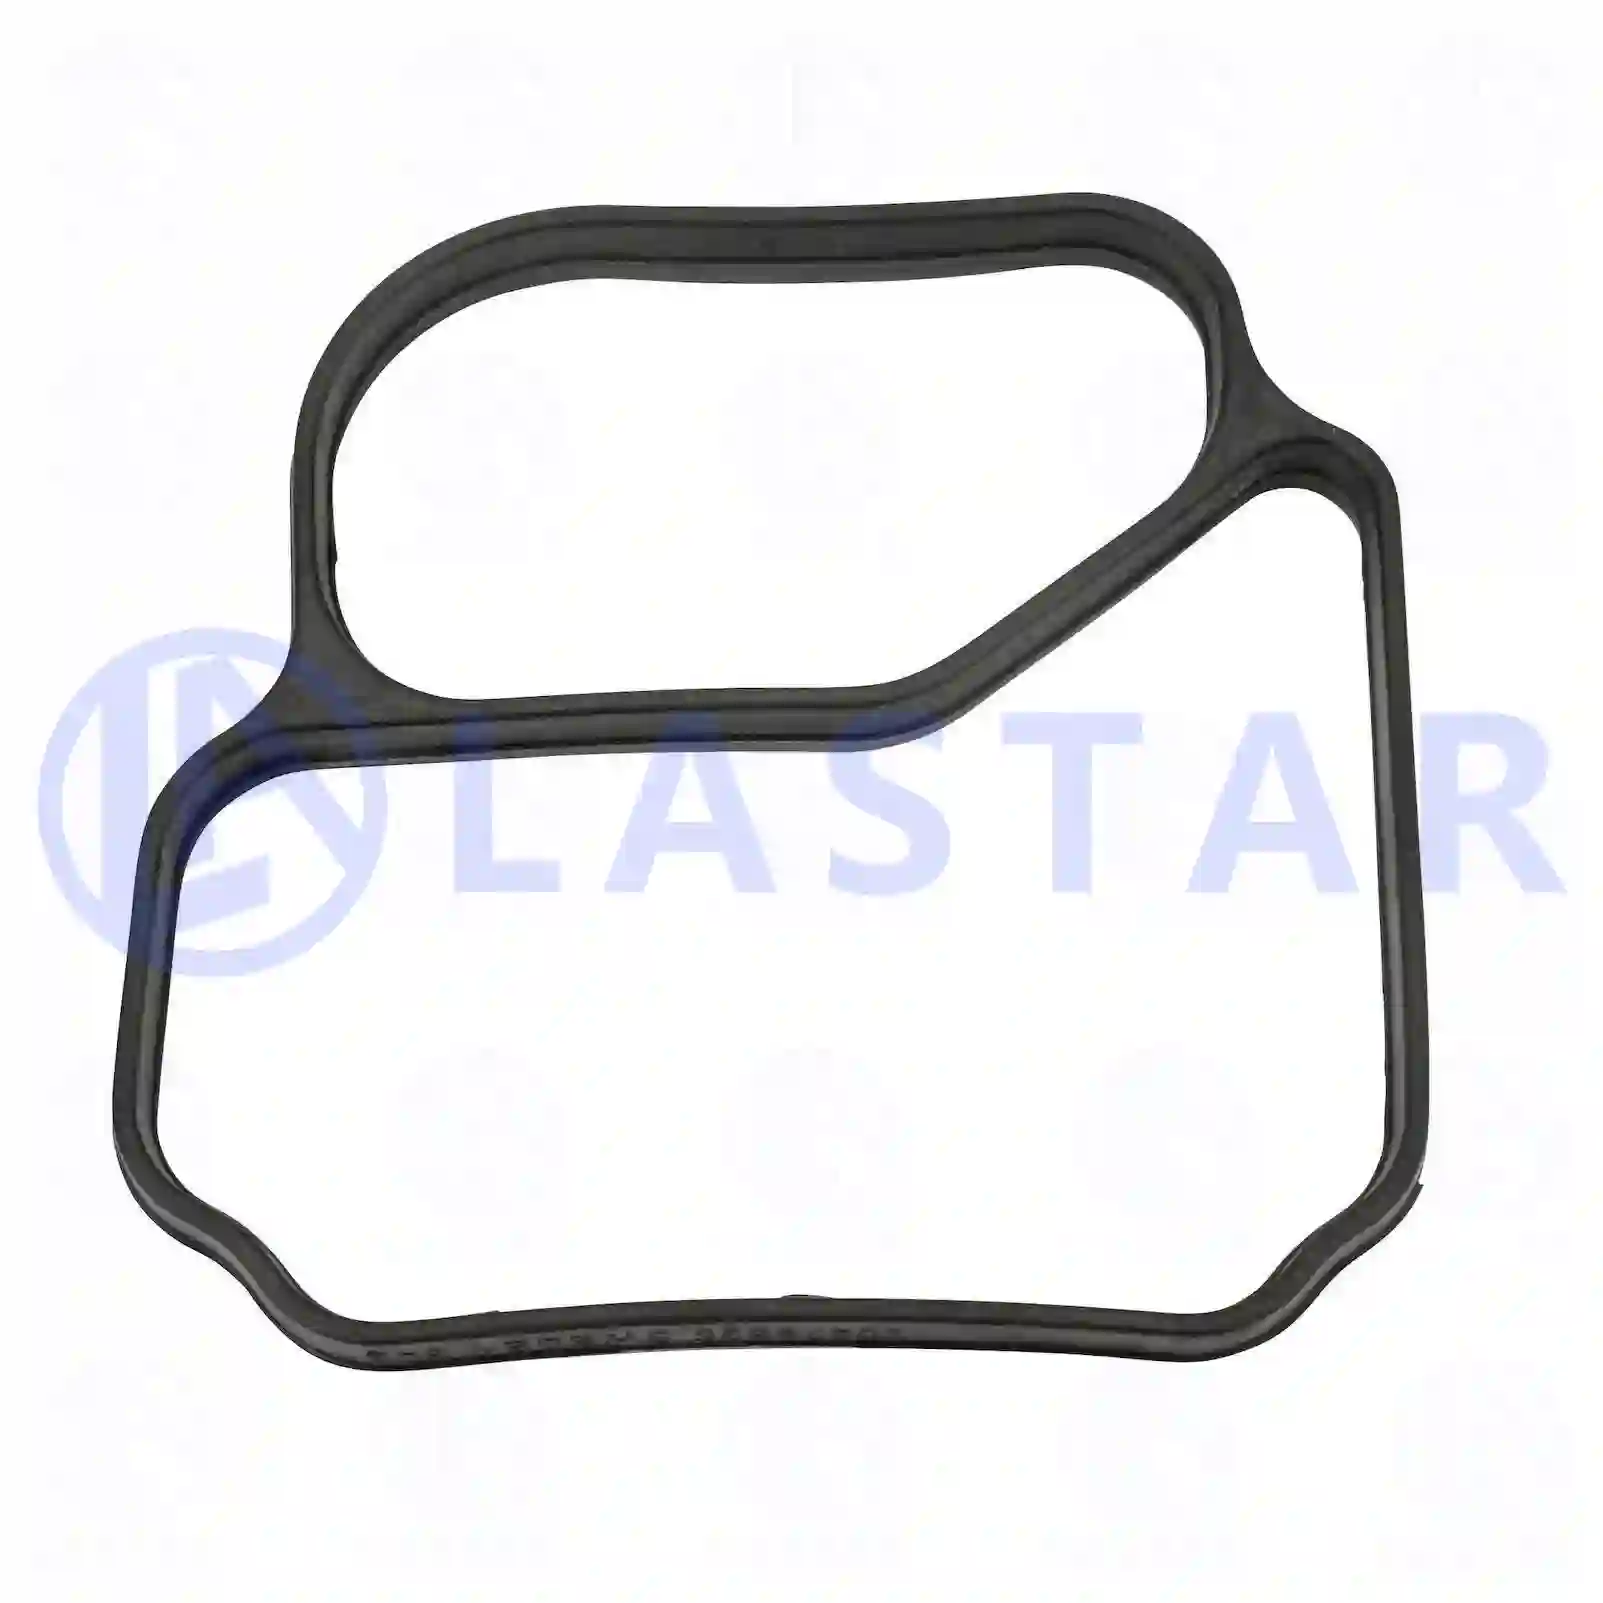 Gasket, cooling water pipe, 77707663, 7420479636, 20479636, ZG01176-0008 ||  77707663 Lastar Spare Part | Truck Spare Parts, Auotomotive Spare Parts Gasket, cooling water pipe, 77707663, 7420479636, 20479636, ZG01176-0008 ||  77707663 Lastar Spare Part | Truck Spare Parts, Auotomotive Spare Parts